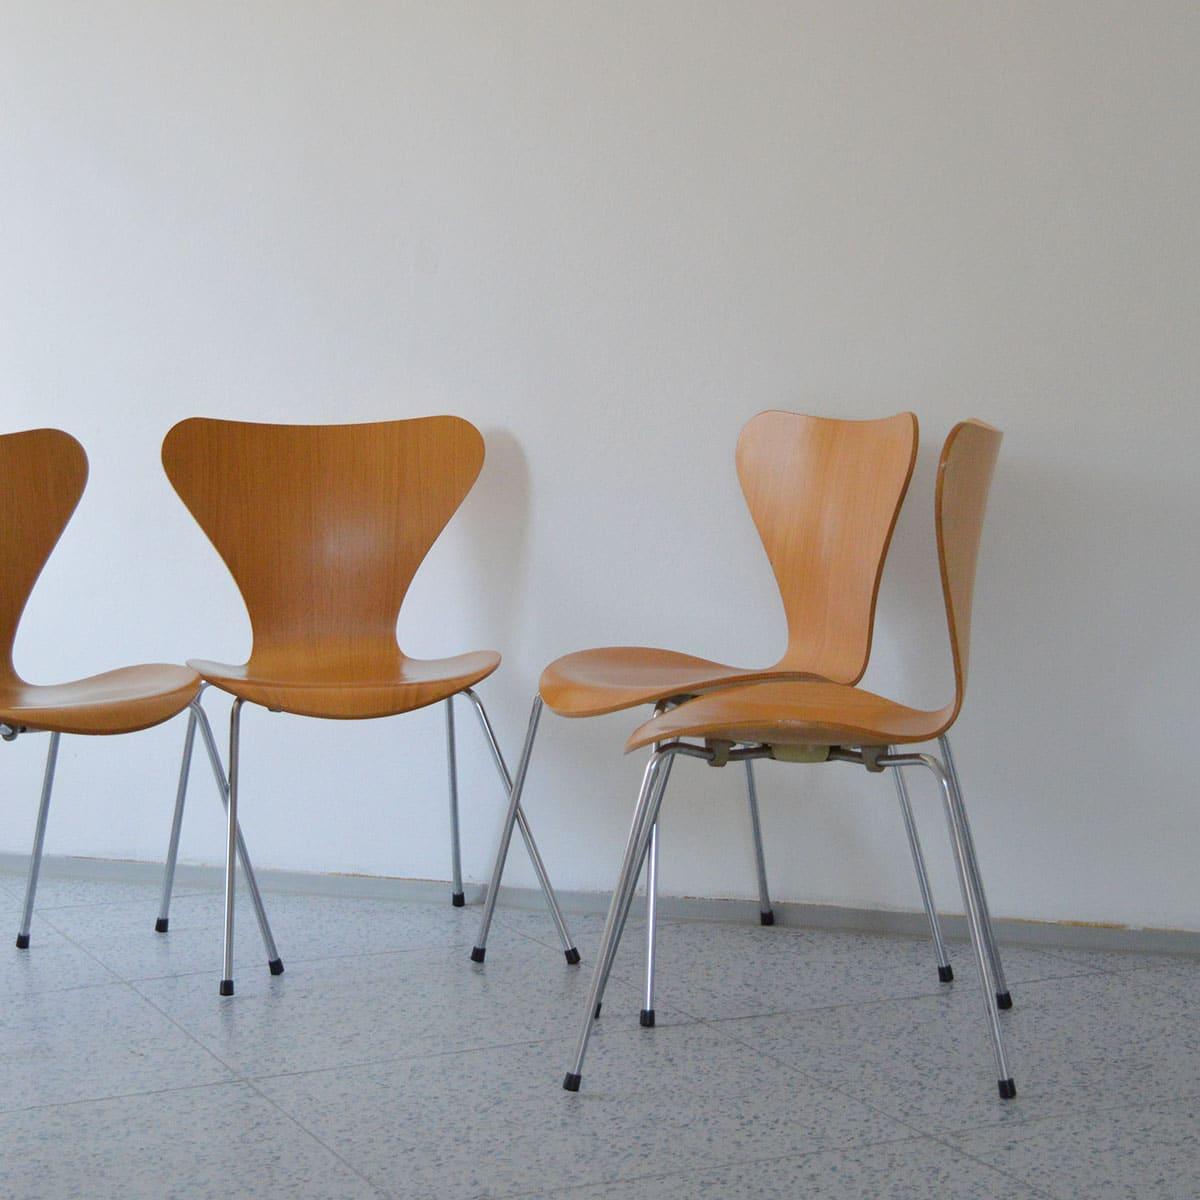 Set of four chairs in plywood and chrome, model 3107 or Series 7, designed by Arne Jacobsen and manufactured by Fritz Hansen in Denmark, 1988.

These iconic 